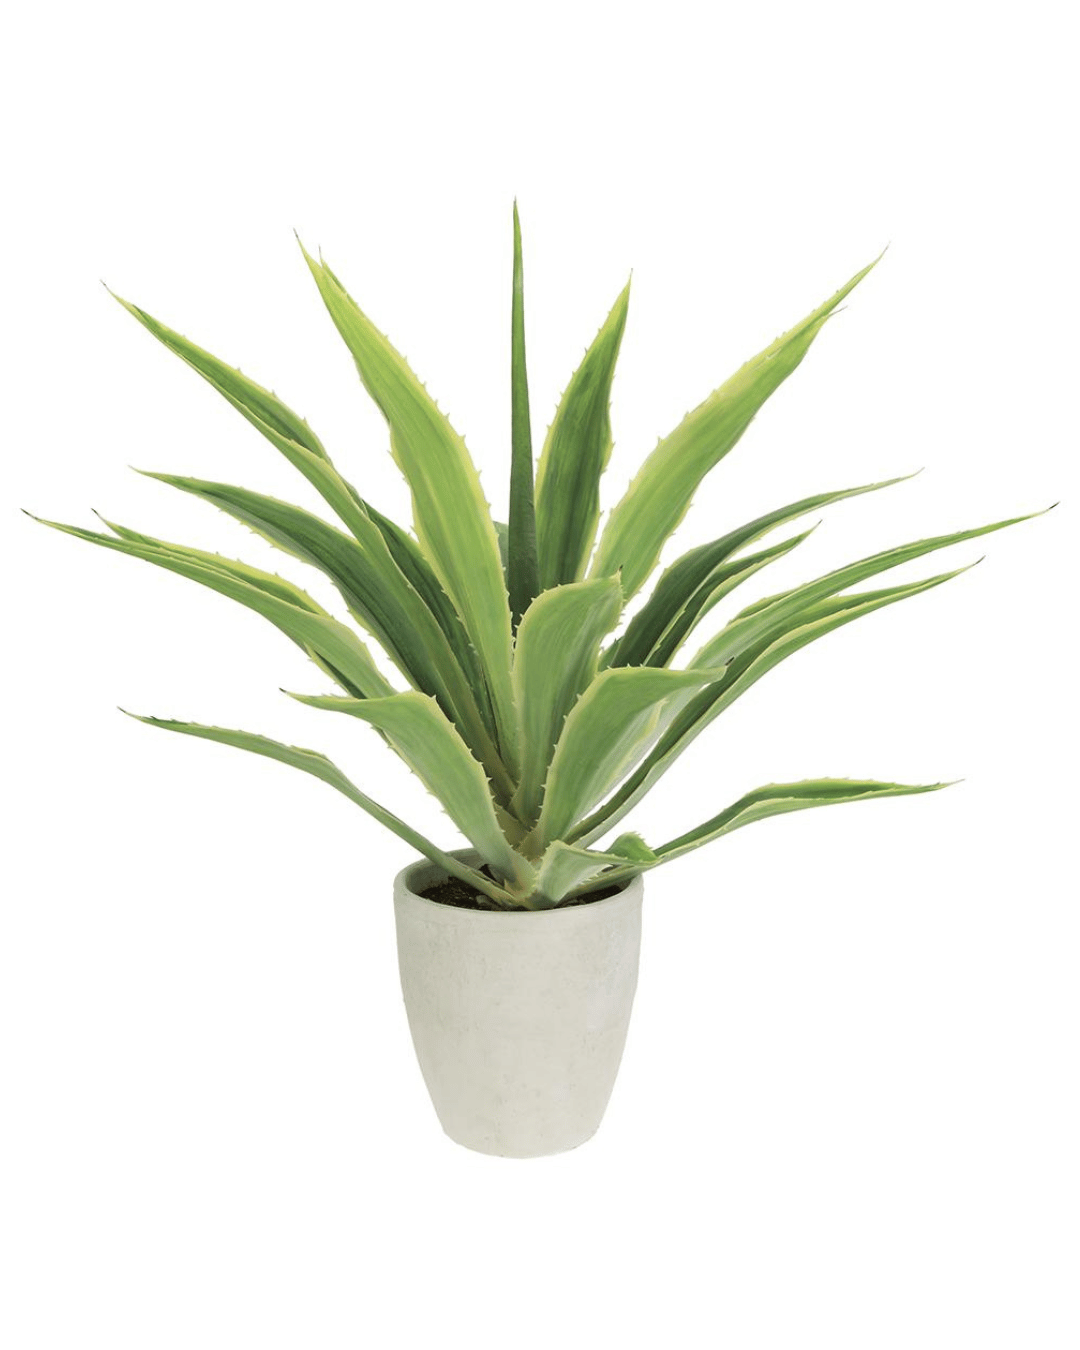 A vibrant 32" Agave in Cement Pot with long, pointed leaves featuring light green edges, housed in a simple, white ceramic pot against a white background in a Scottsdale Arizona bungalow by AllState Floral And Craft.